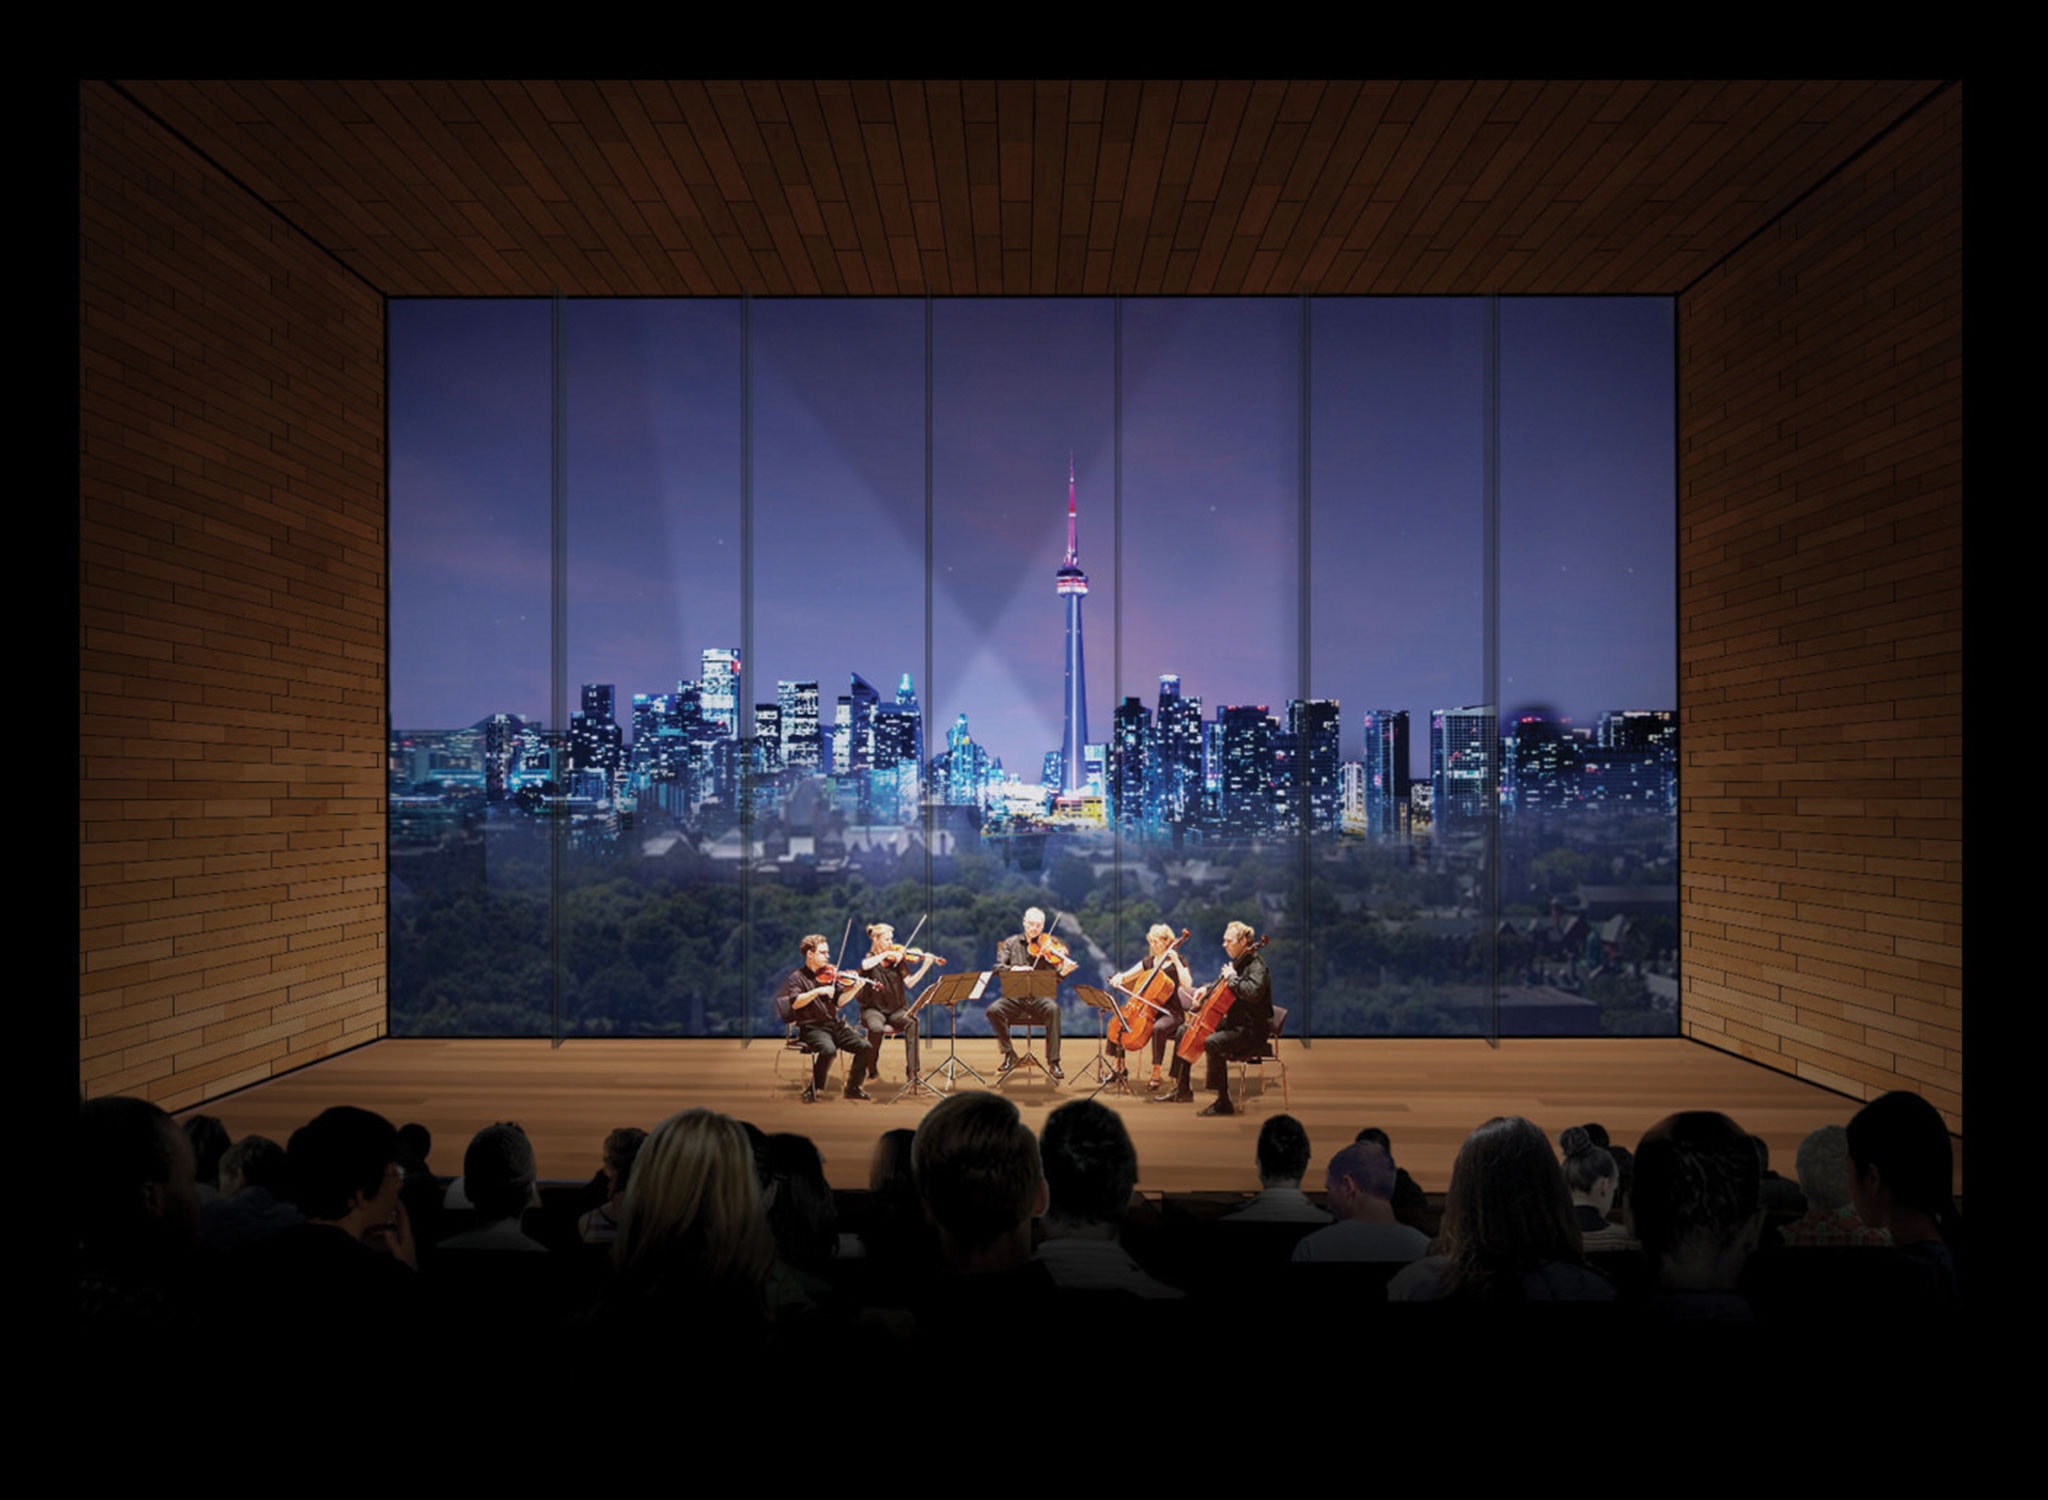 In an artist’s illustration, 5 musicians play string instruments on a stage. Behind them, big windows show Toronto at night.